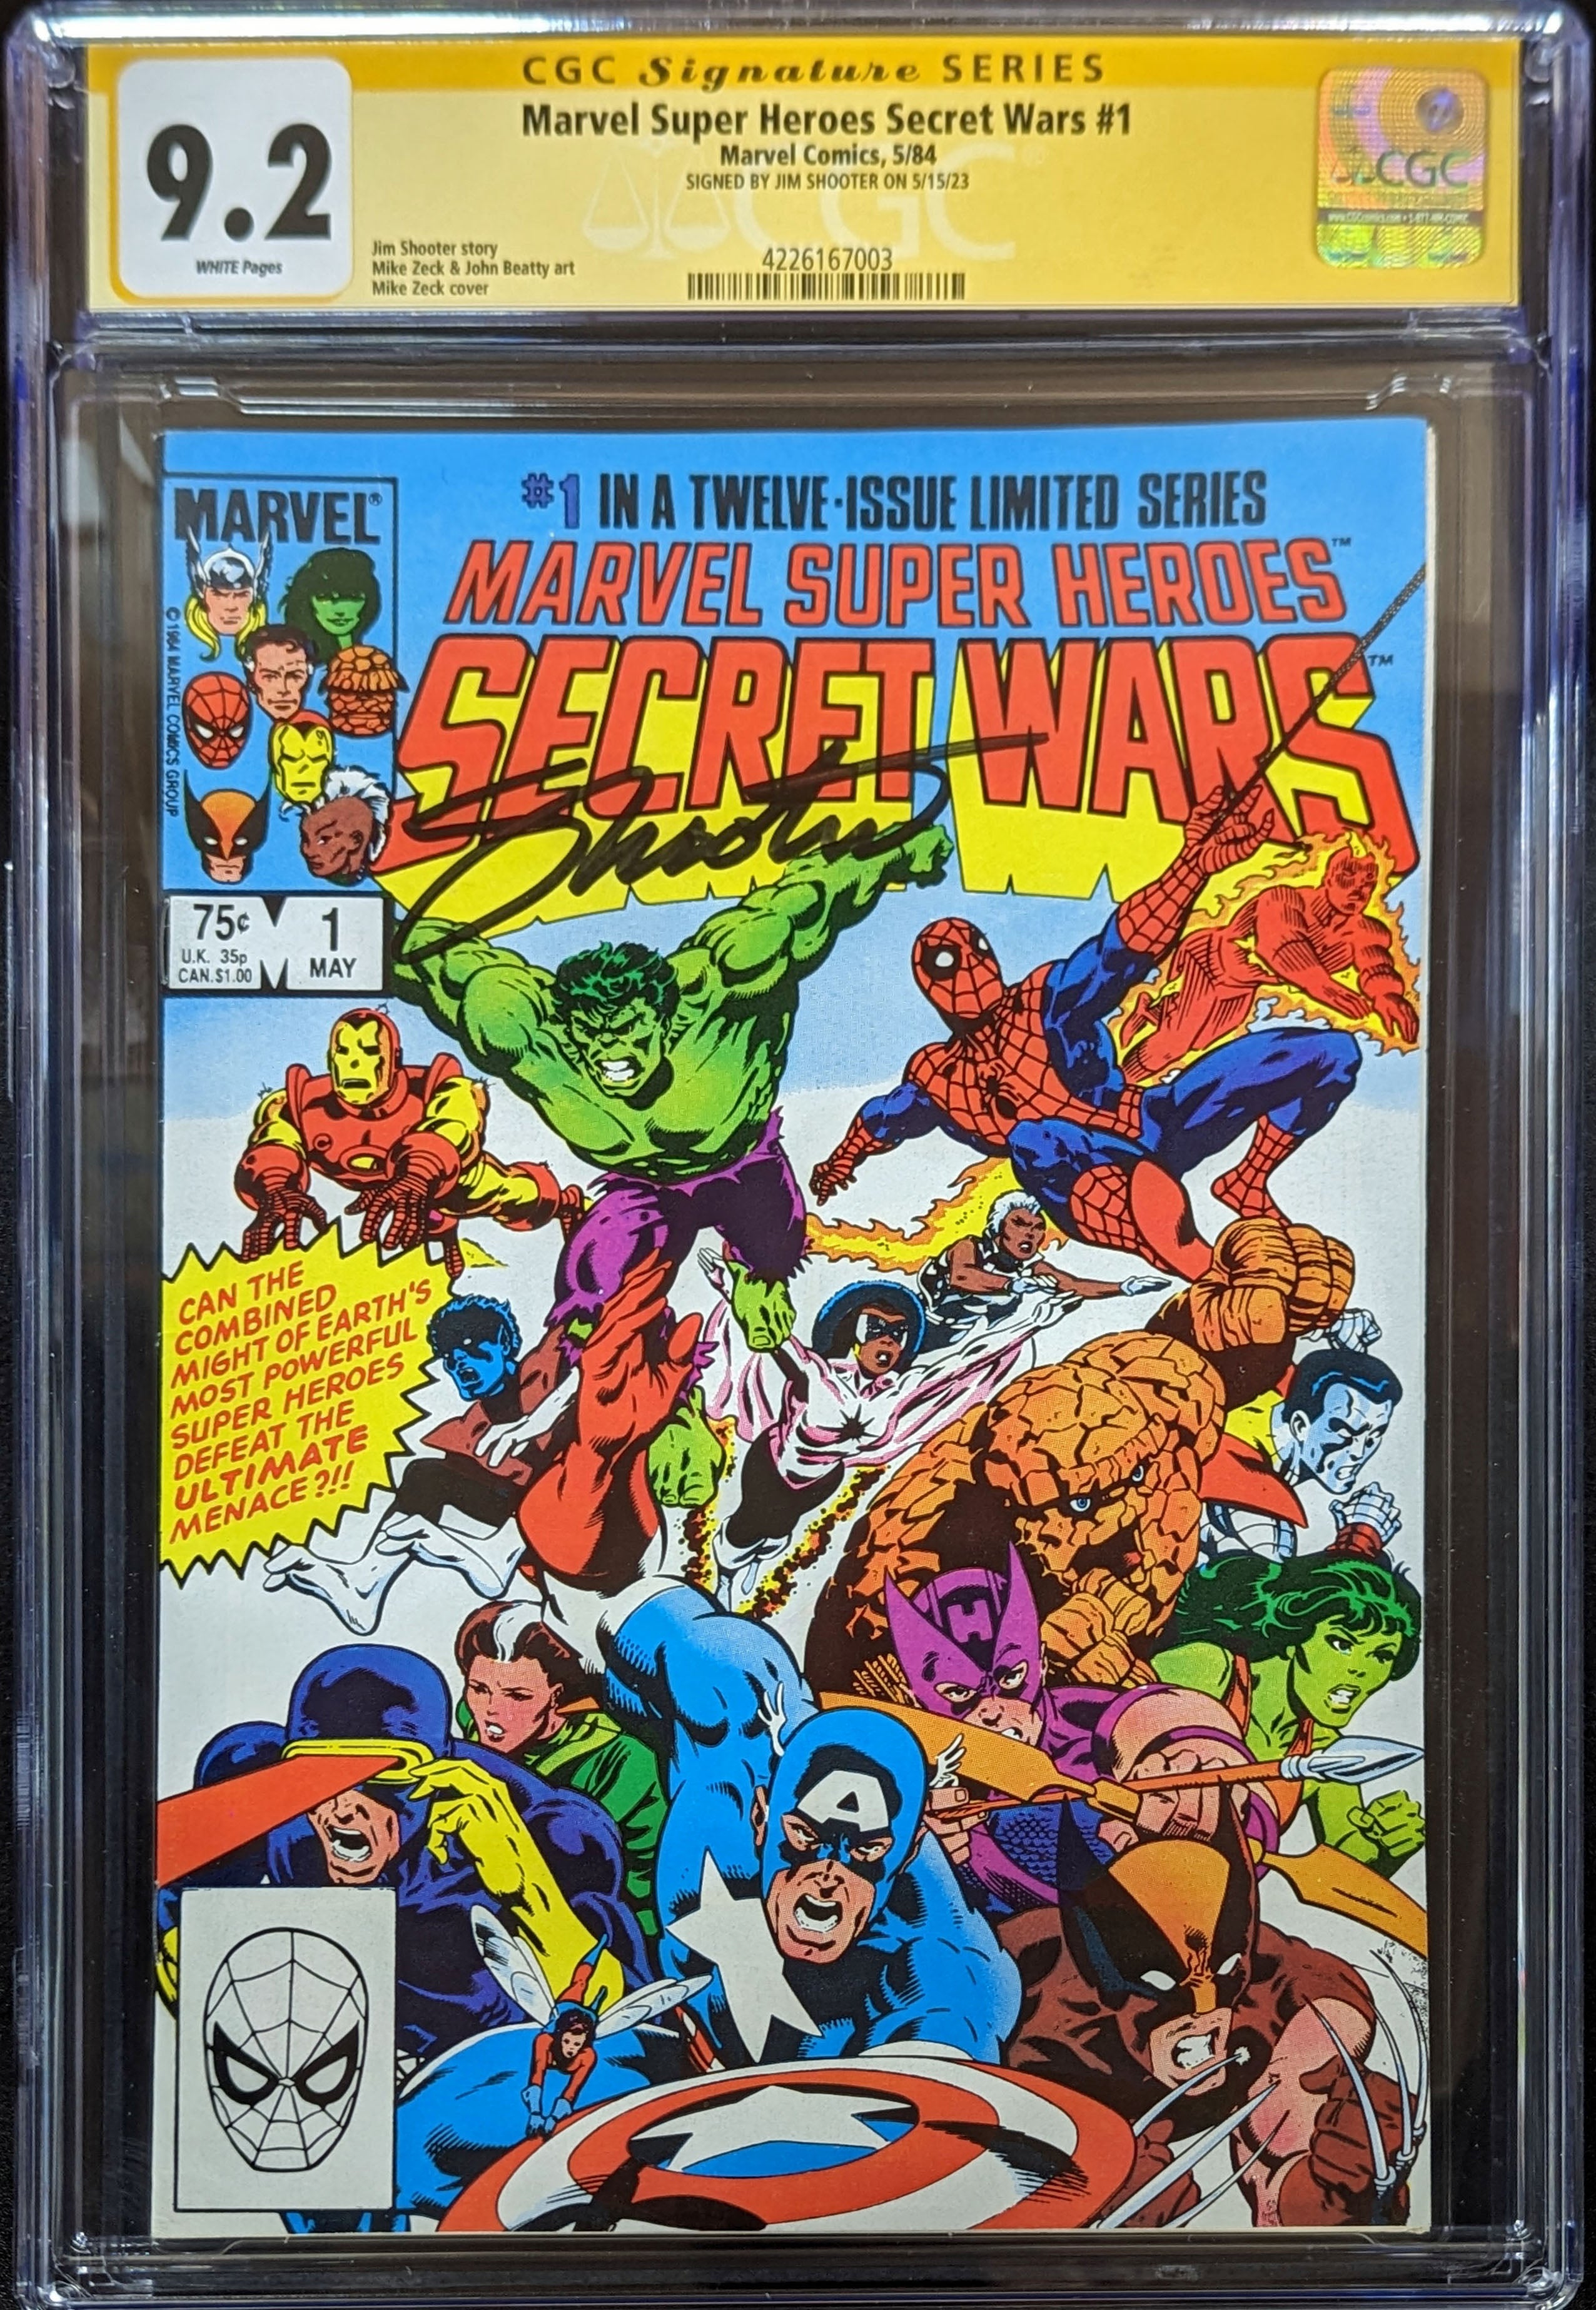 Secret Wars #1 (1984) CGC 9.2 Signed by Jim Shooter